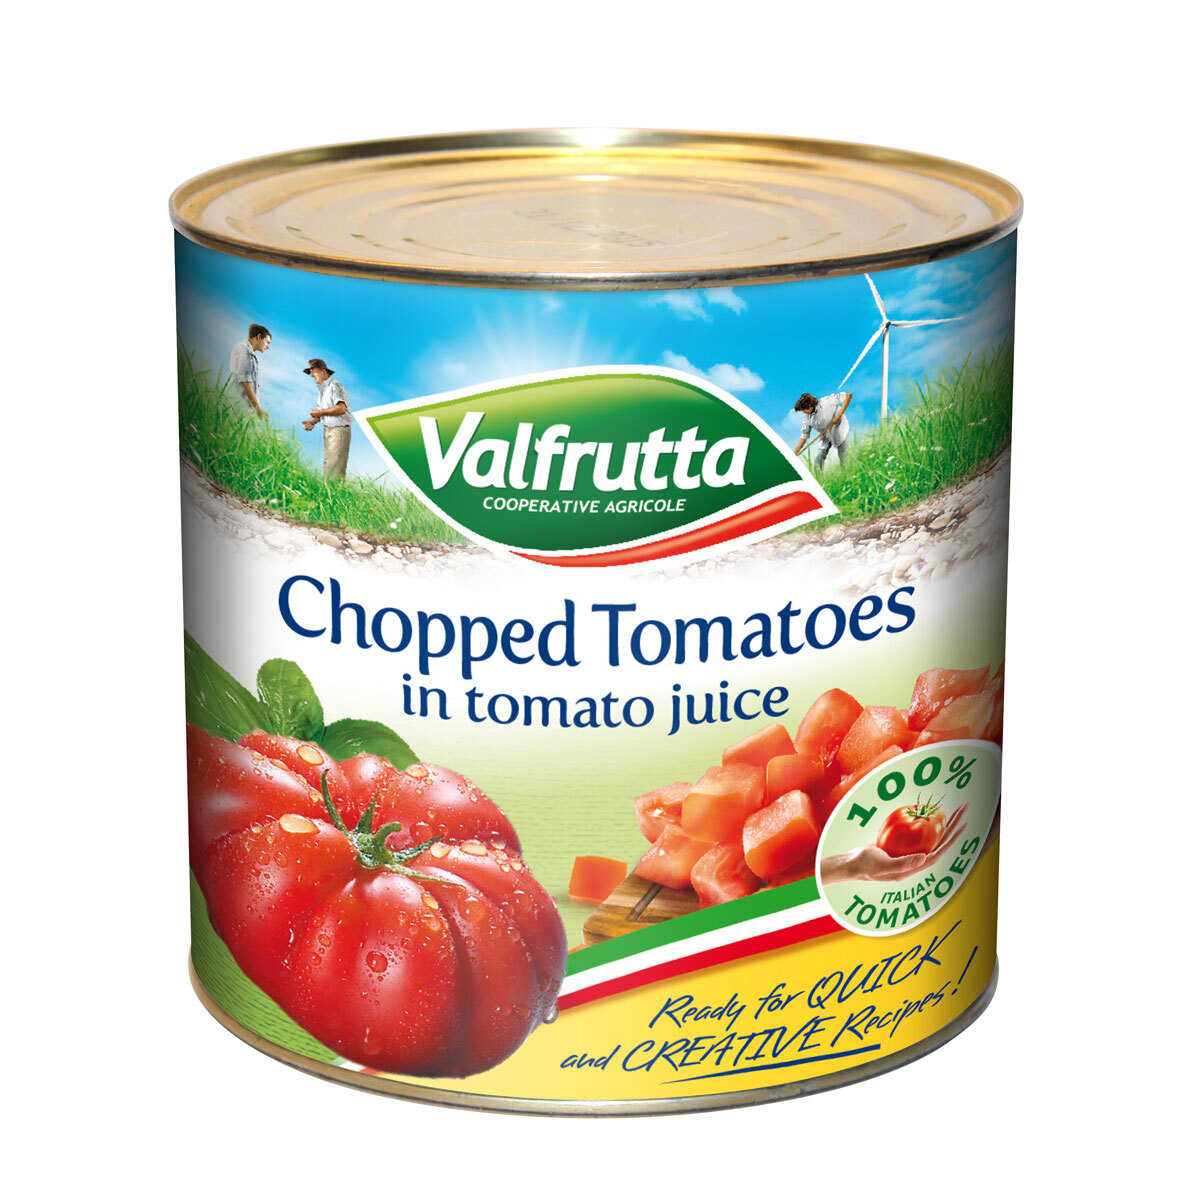 Cut out image of tinned tomato on whte background